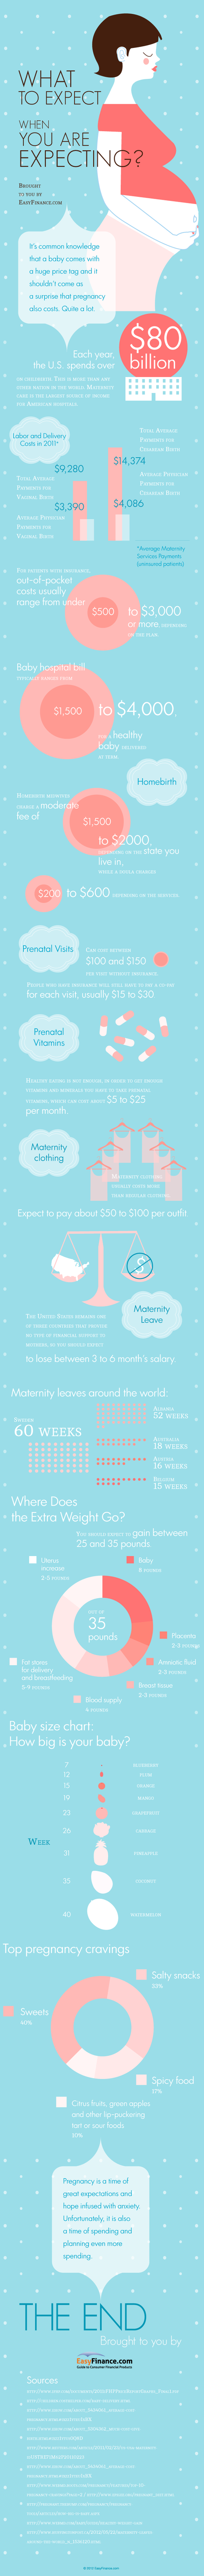 What To Expect When You Are Expecting Infographic